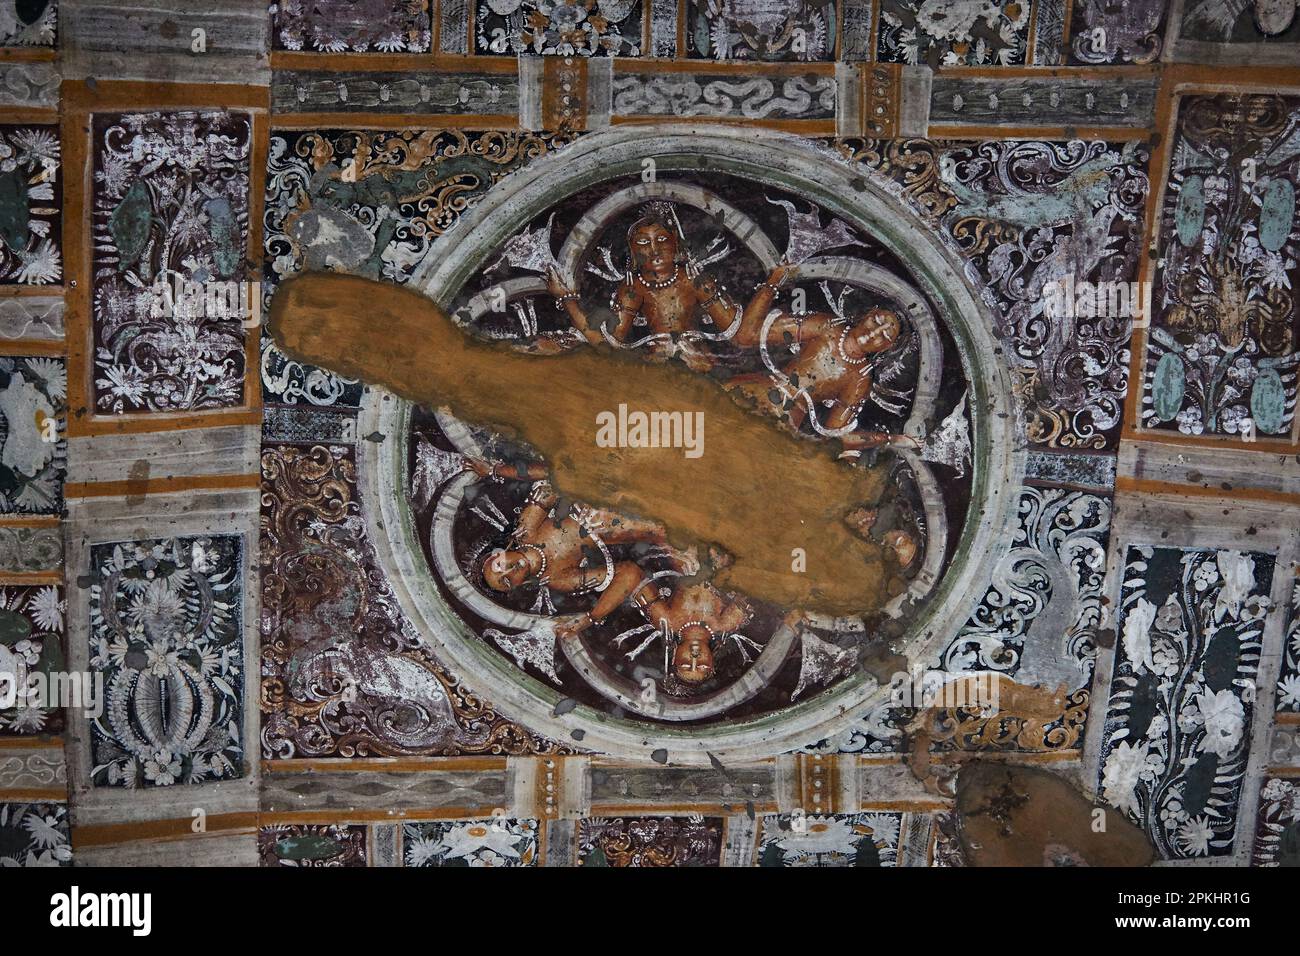 The Ajanta Caves ceiling painting, India. Stock Photo